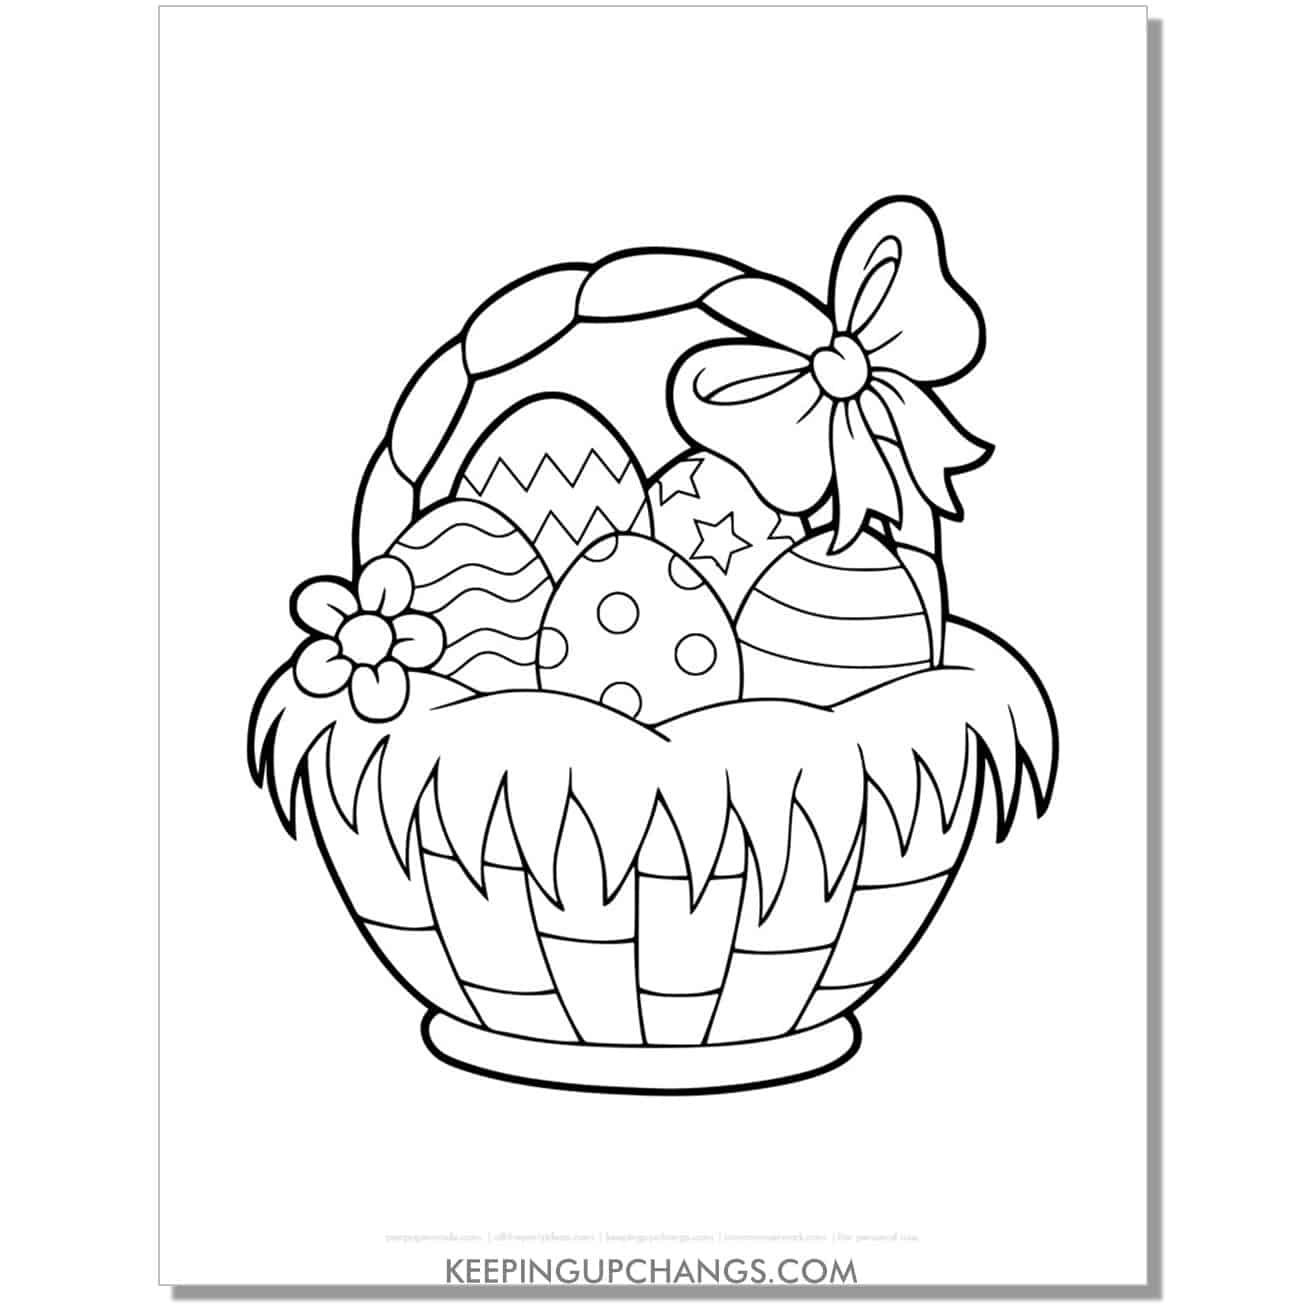 fun Easter eggs resting on long grass in woven basket coloring page, sheet.